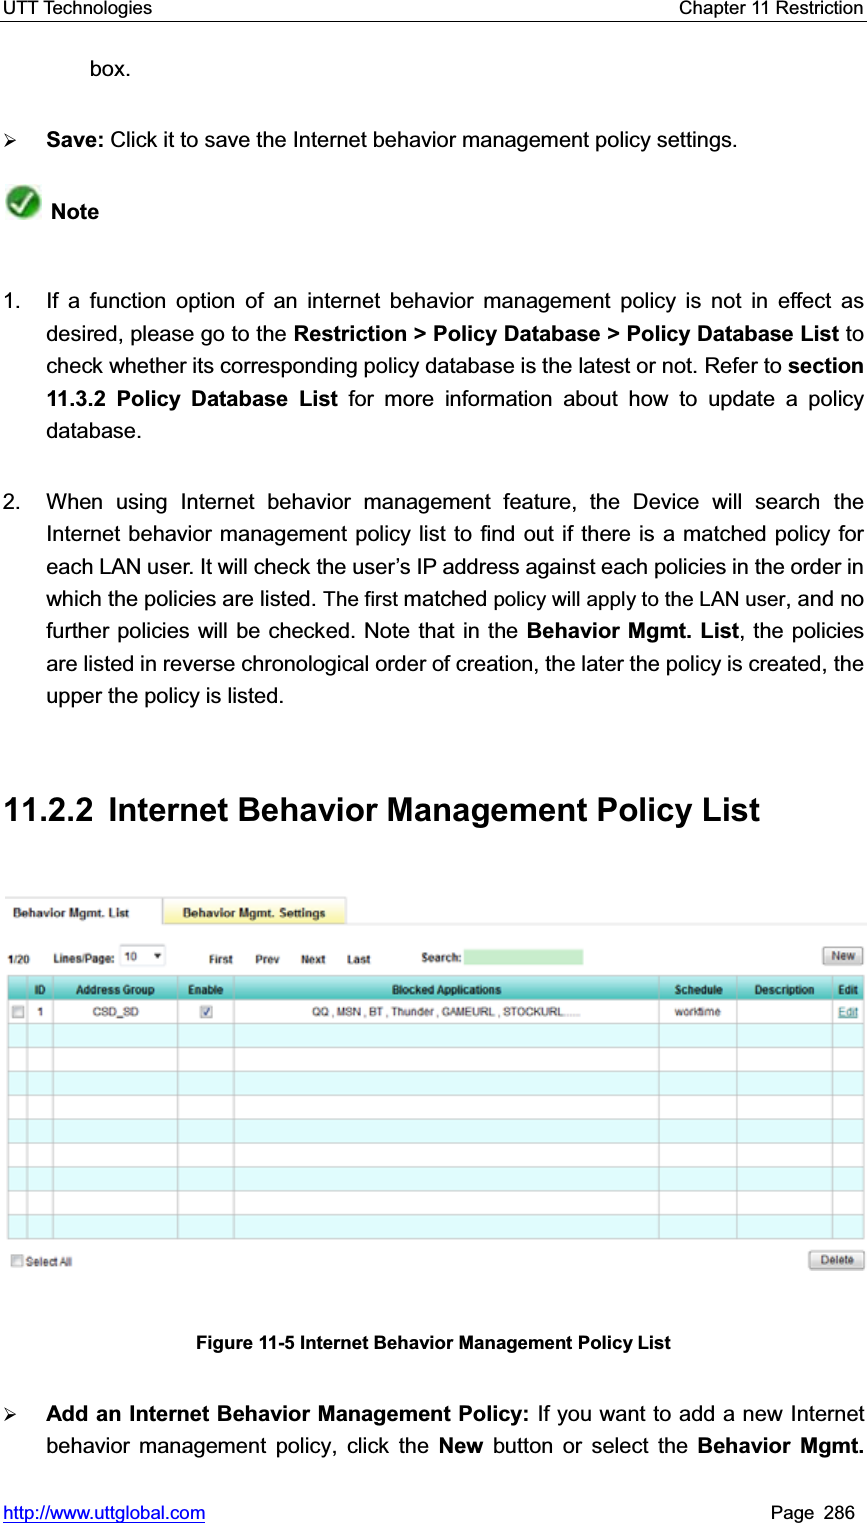 UTT Technologies    Chapter 11 Restriction   http://www.uttglobal.com Page 286 box. ¾Save: Click it to save the Internet behavior management policy settings.Note1.  If a function option of an internet behavior management policy is not in effect as desired, please go to the Restriction &gt; Policy Database &gt; Policy Database List tocheck whether its corresponding policy database is the latest or not. Refer to section 11.3.2 Policy Database List for more information about how to update a policy database. 2.  When using Internet behavior management feature, the Device will search the Internet behavior management policy list to find out if there is a matched policy for each LAN user. It will check the user¶s IP address against each policies in the order in which the policies are listed. The first matched policy will apply to the LAN user, and no further policies will be checked. Note that in the Behavior Mgmt. List, the policies are listed in reverse chronological order of creation, the later the policy is created, the upper the policy is listed. 11.2.2  Internet Behavior Management Policy List Figure 11-5 Internet Behavior Management Policy List ¾Add an Internet Behavior Management Policy: If you want to add a new Internet behavior management policy, click the New button or select the Behavior Mgmt. 